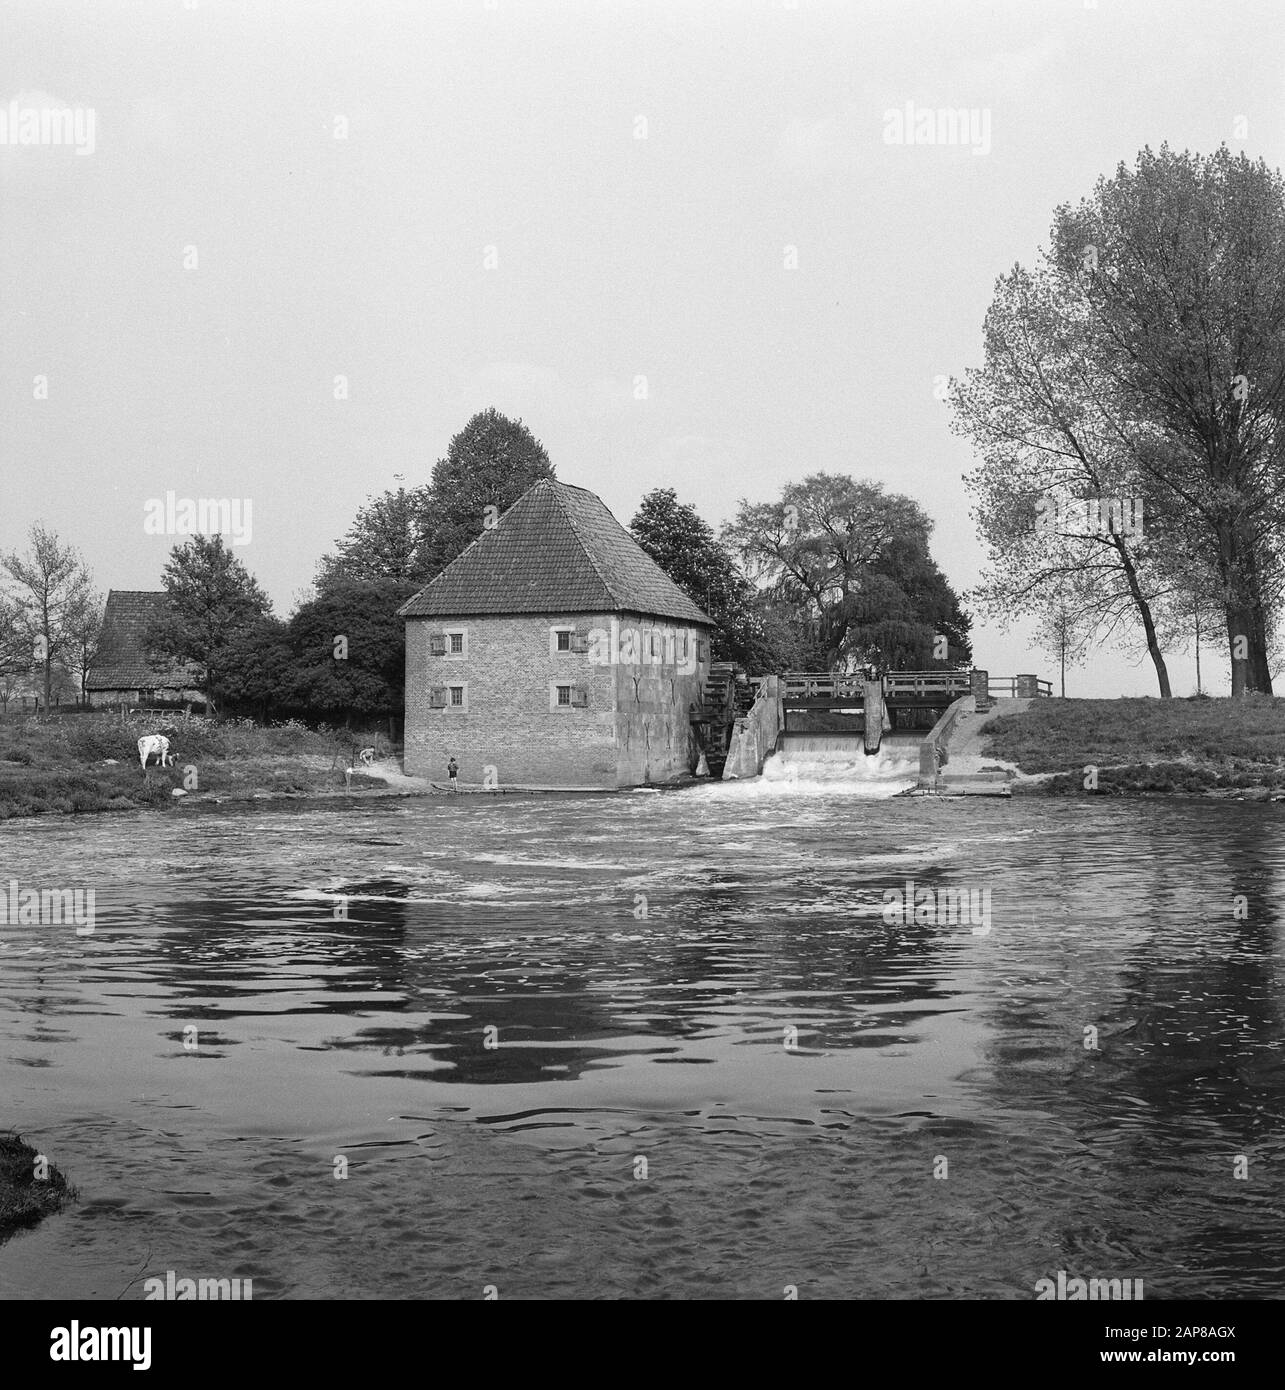 The Mallumse mill near Eibergen (gem. Berkelland) located on the river Berkel. The mill was part of the Hof in Mallum and was first mentioned in 1188 in the goods list of the Counts Van Dale from Diepenheim. According to an act of 1430, there is a question of a straitmill. The inhabitants of Eibergen and the surrounding area were obliged to have their choirs grind here. Cornmill building with the year 1748 above the side door, pointing to rebuilding after fire. The year 1755 also indicates rebuilding after fire. Until 1943 in use as a corn mill. In 1948 partially collapsed Restored under the l Stock Photo